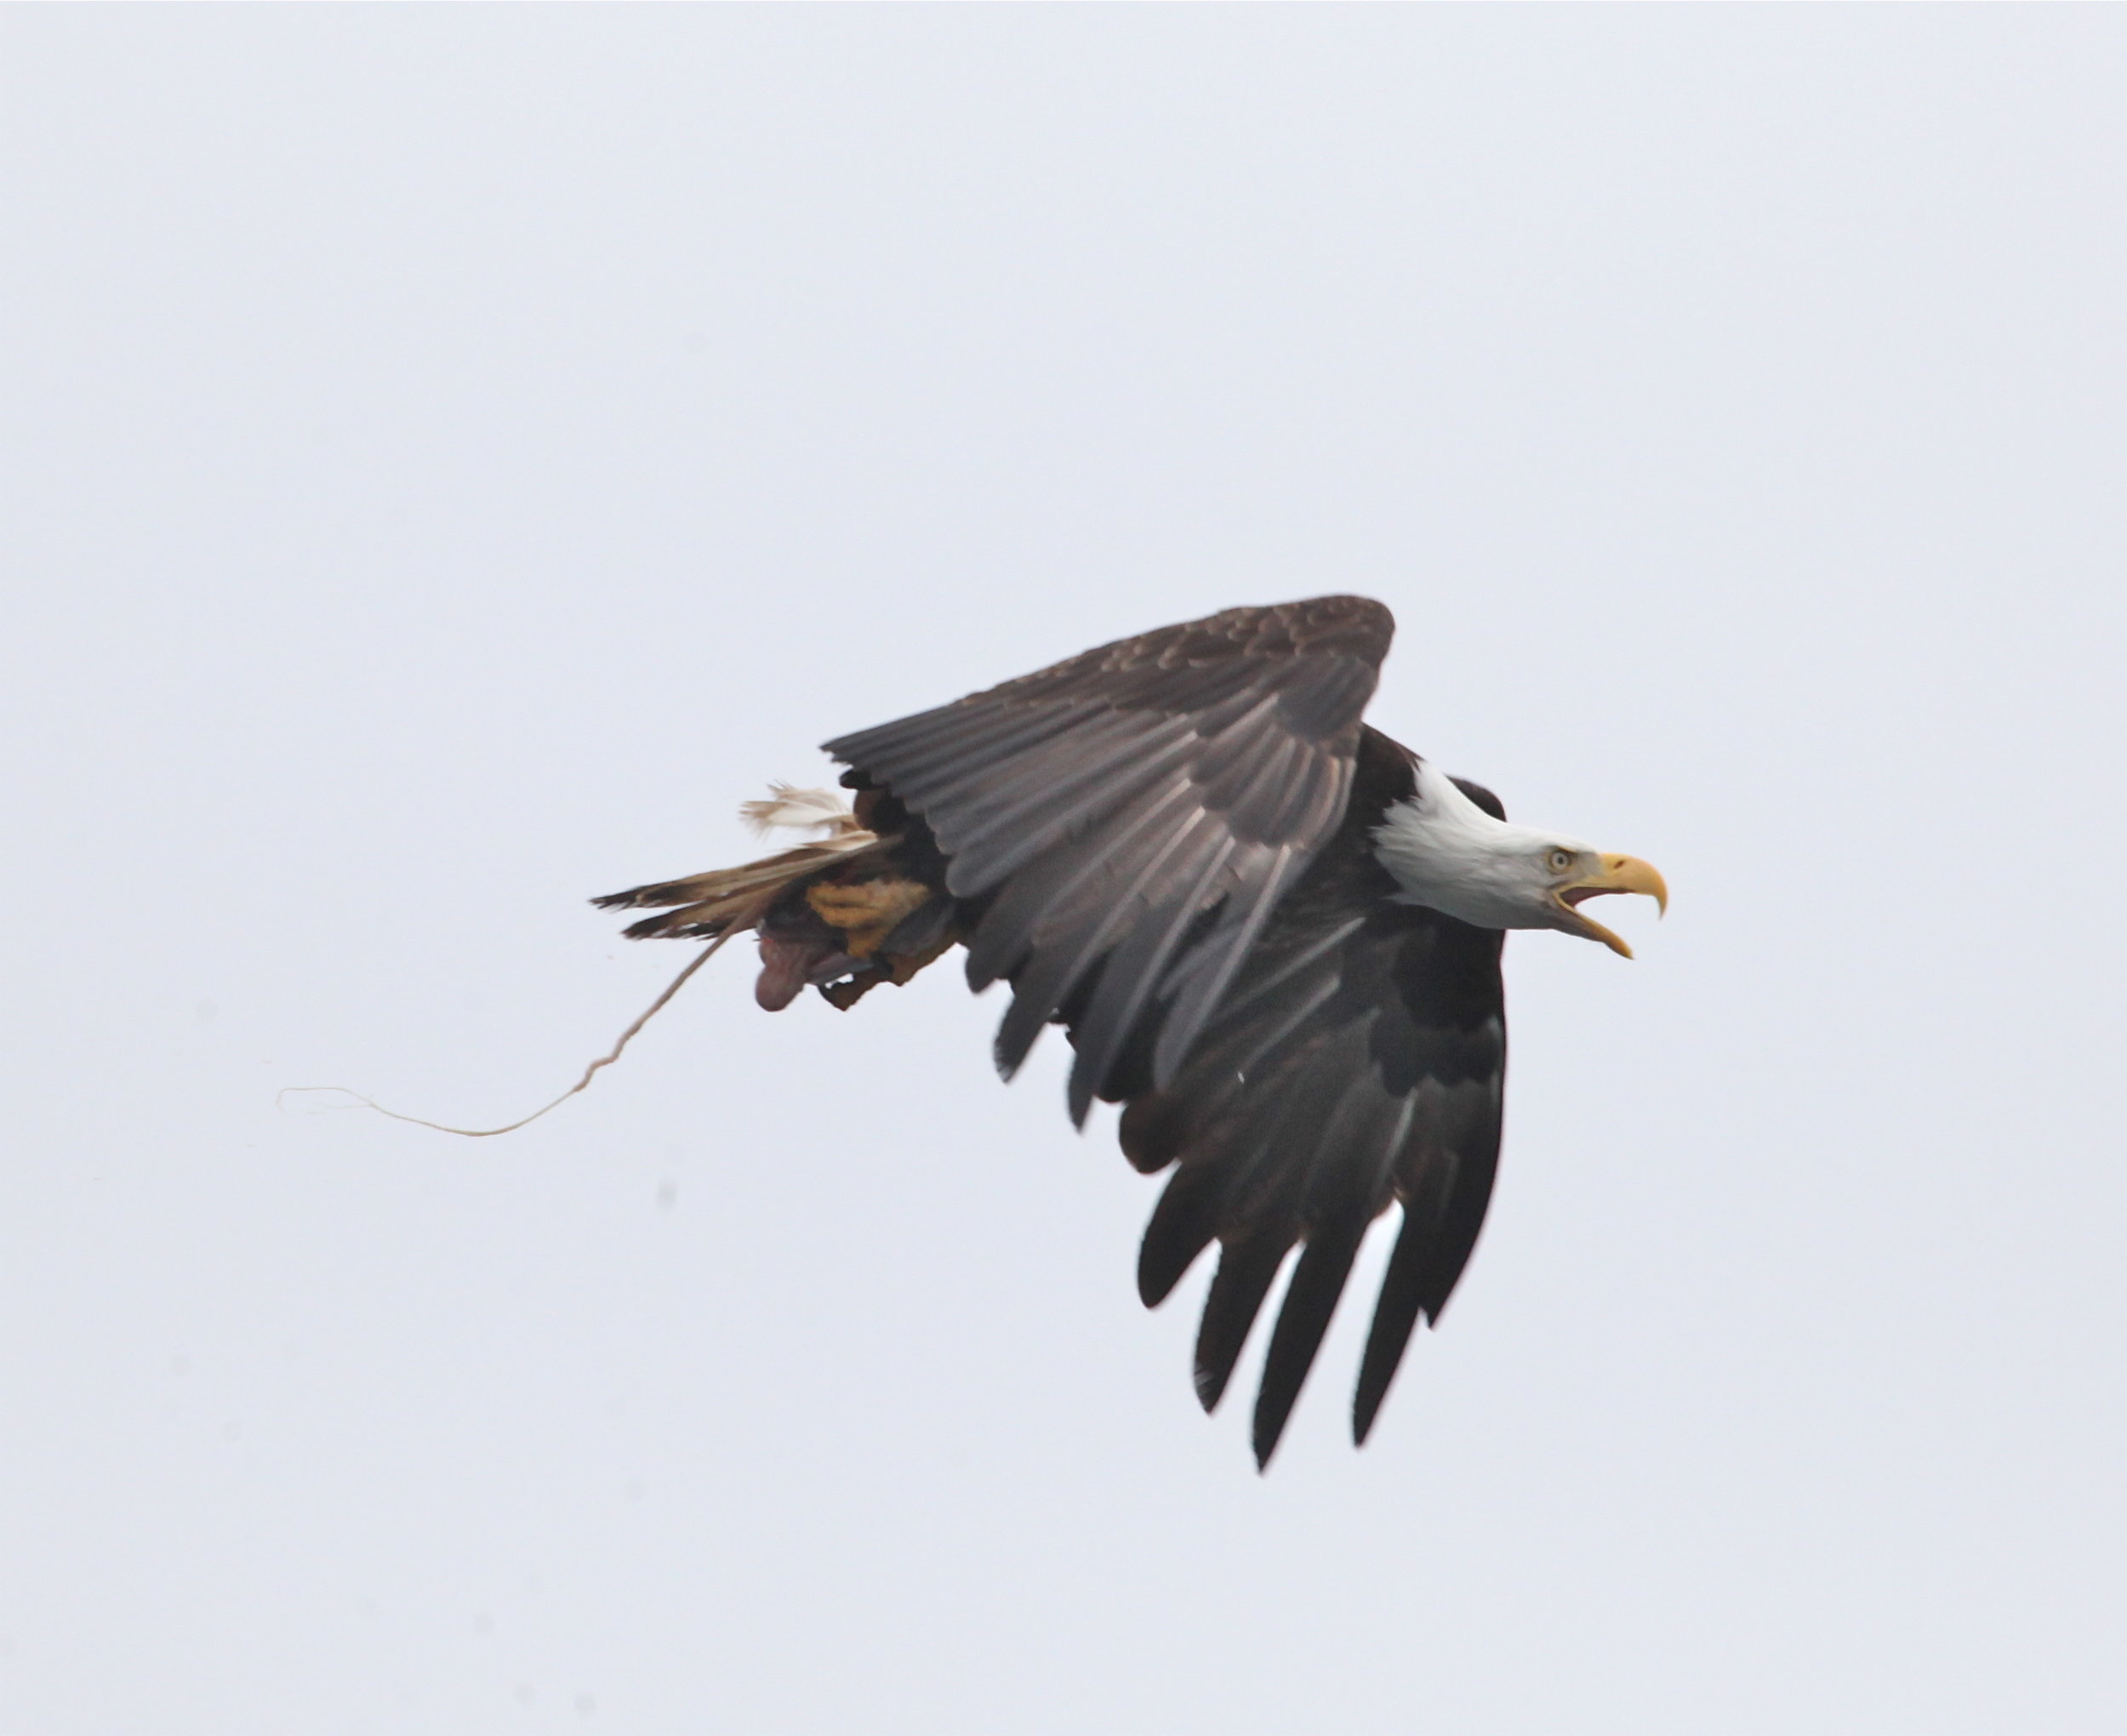 Bald Eagle with part of salmon